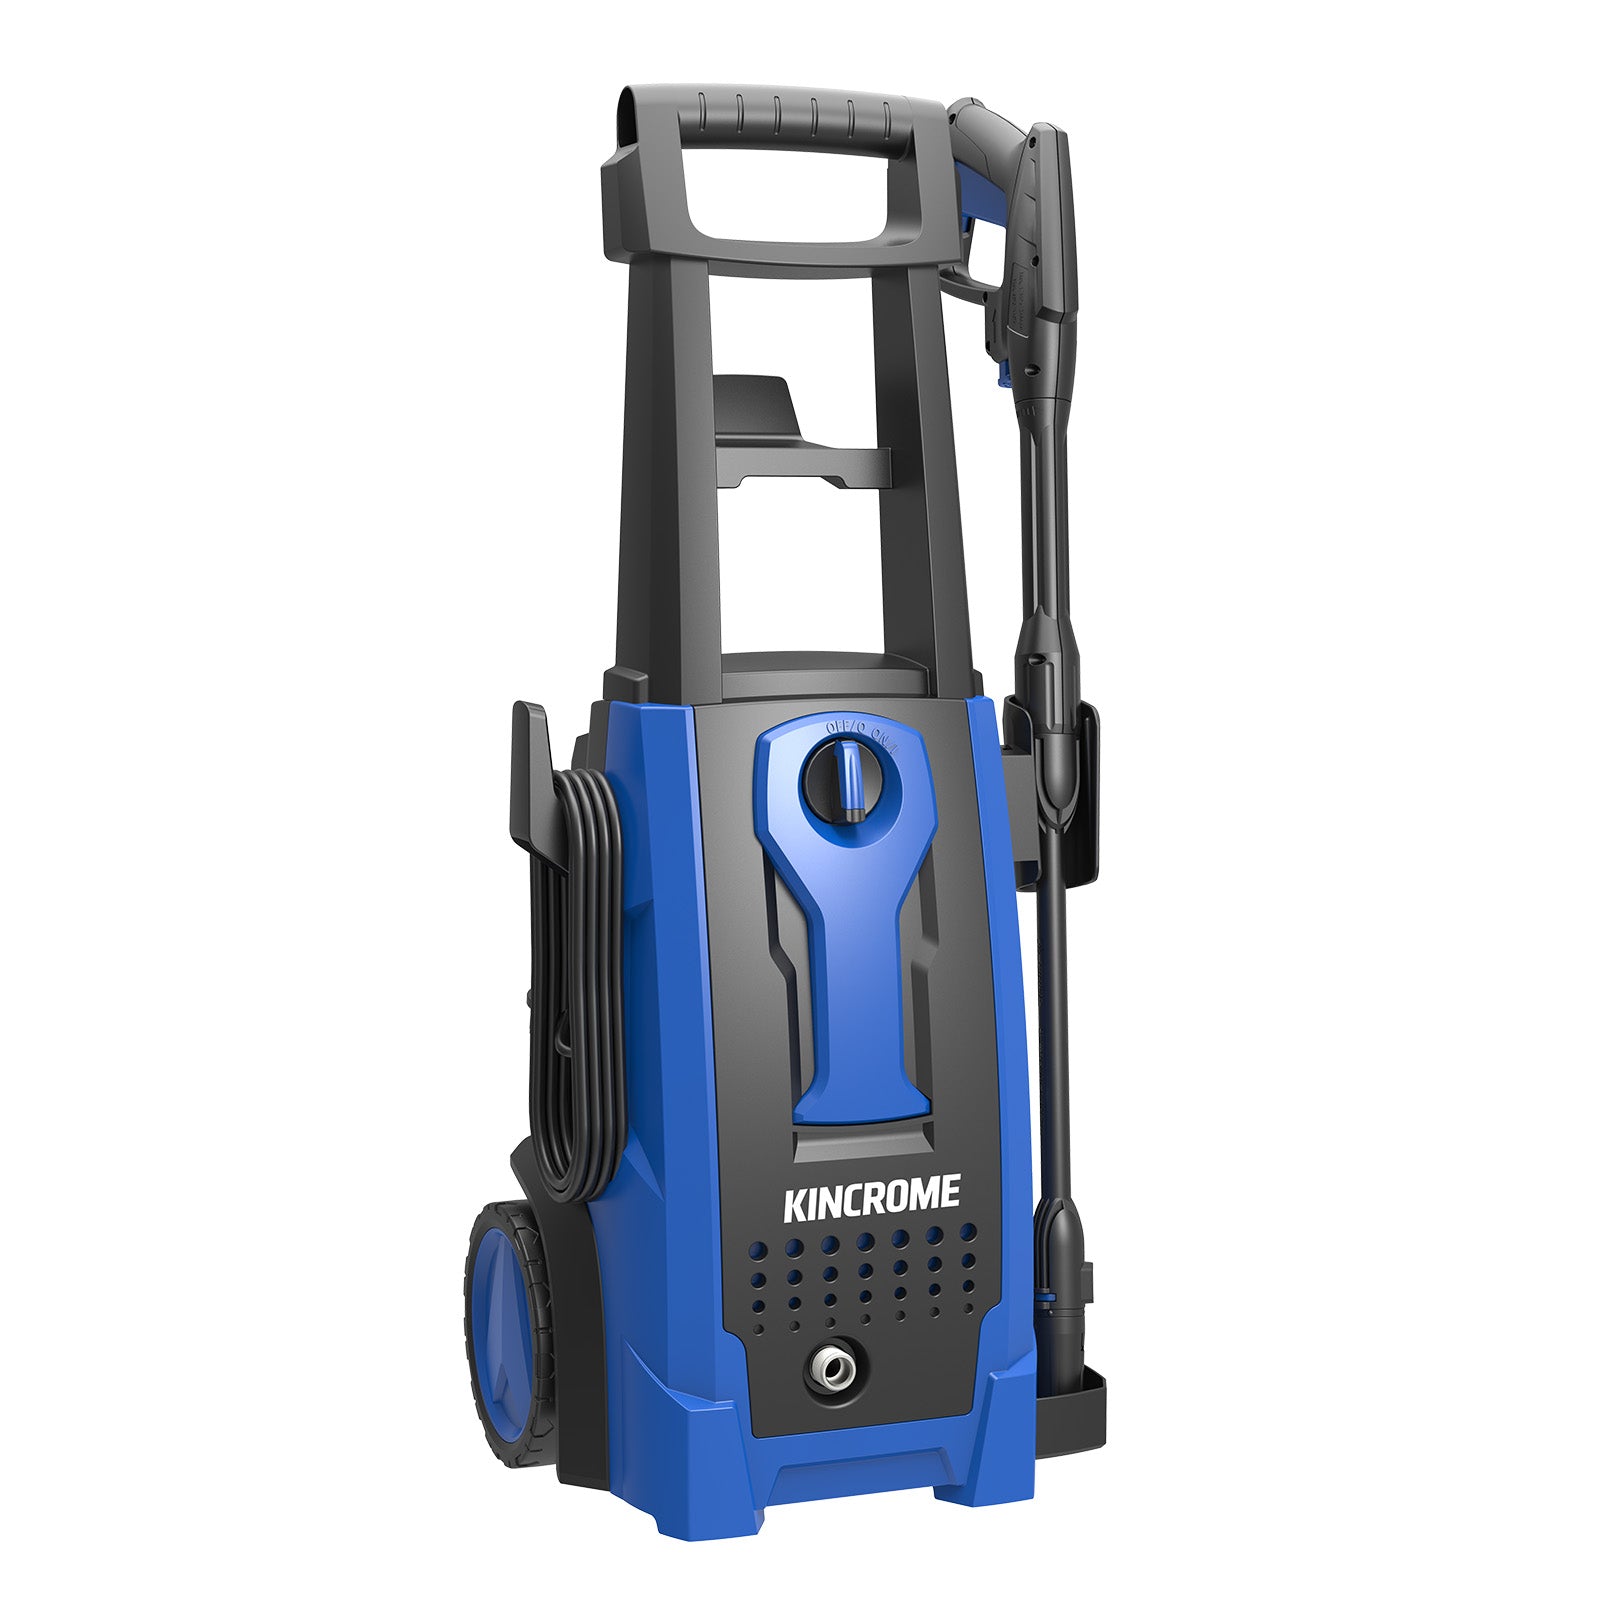 2000W Electric High-Pressure Washer, 2175psi, 7.8L/min, 8m Hose K16251 by Kincrome